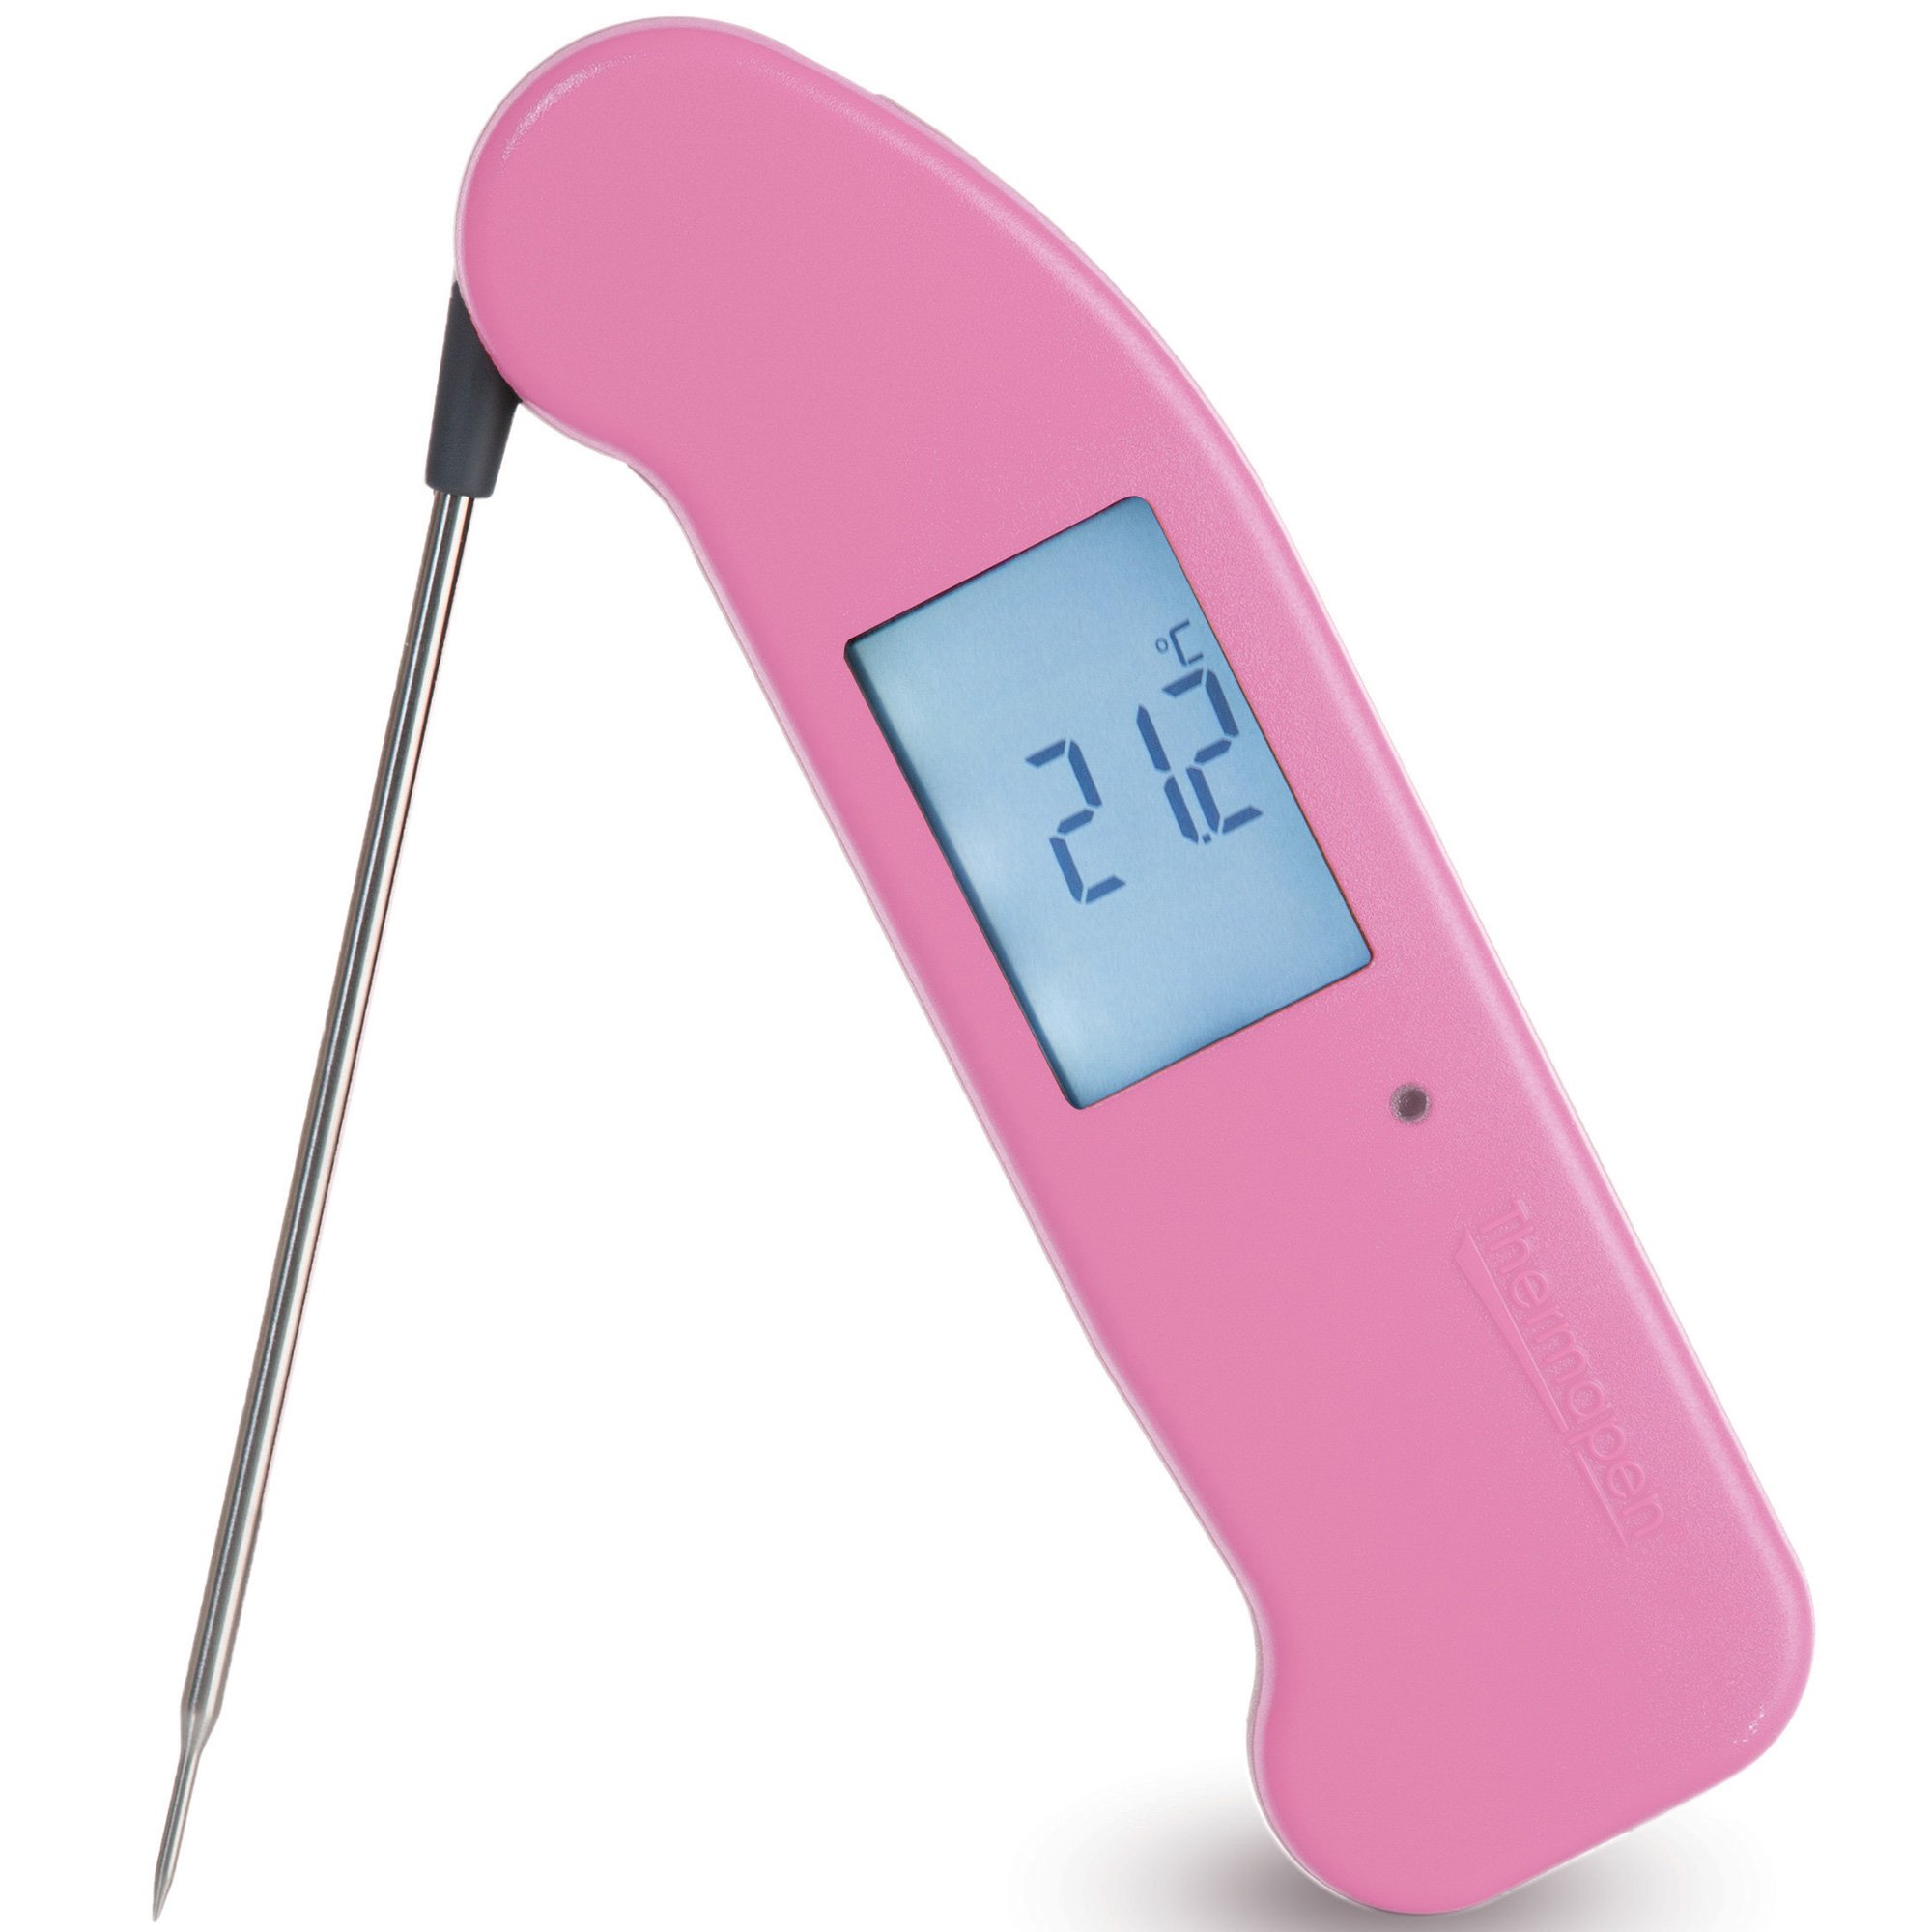 Thermapen ONE Termometer, rosa